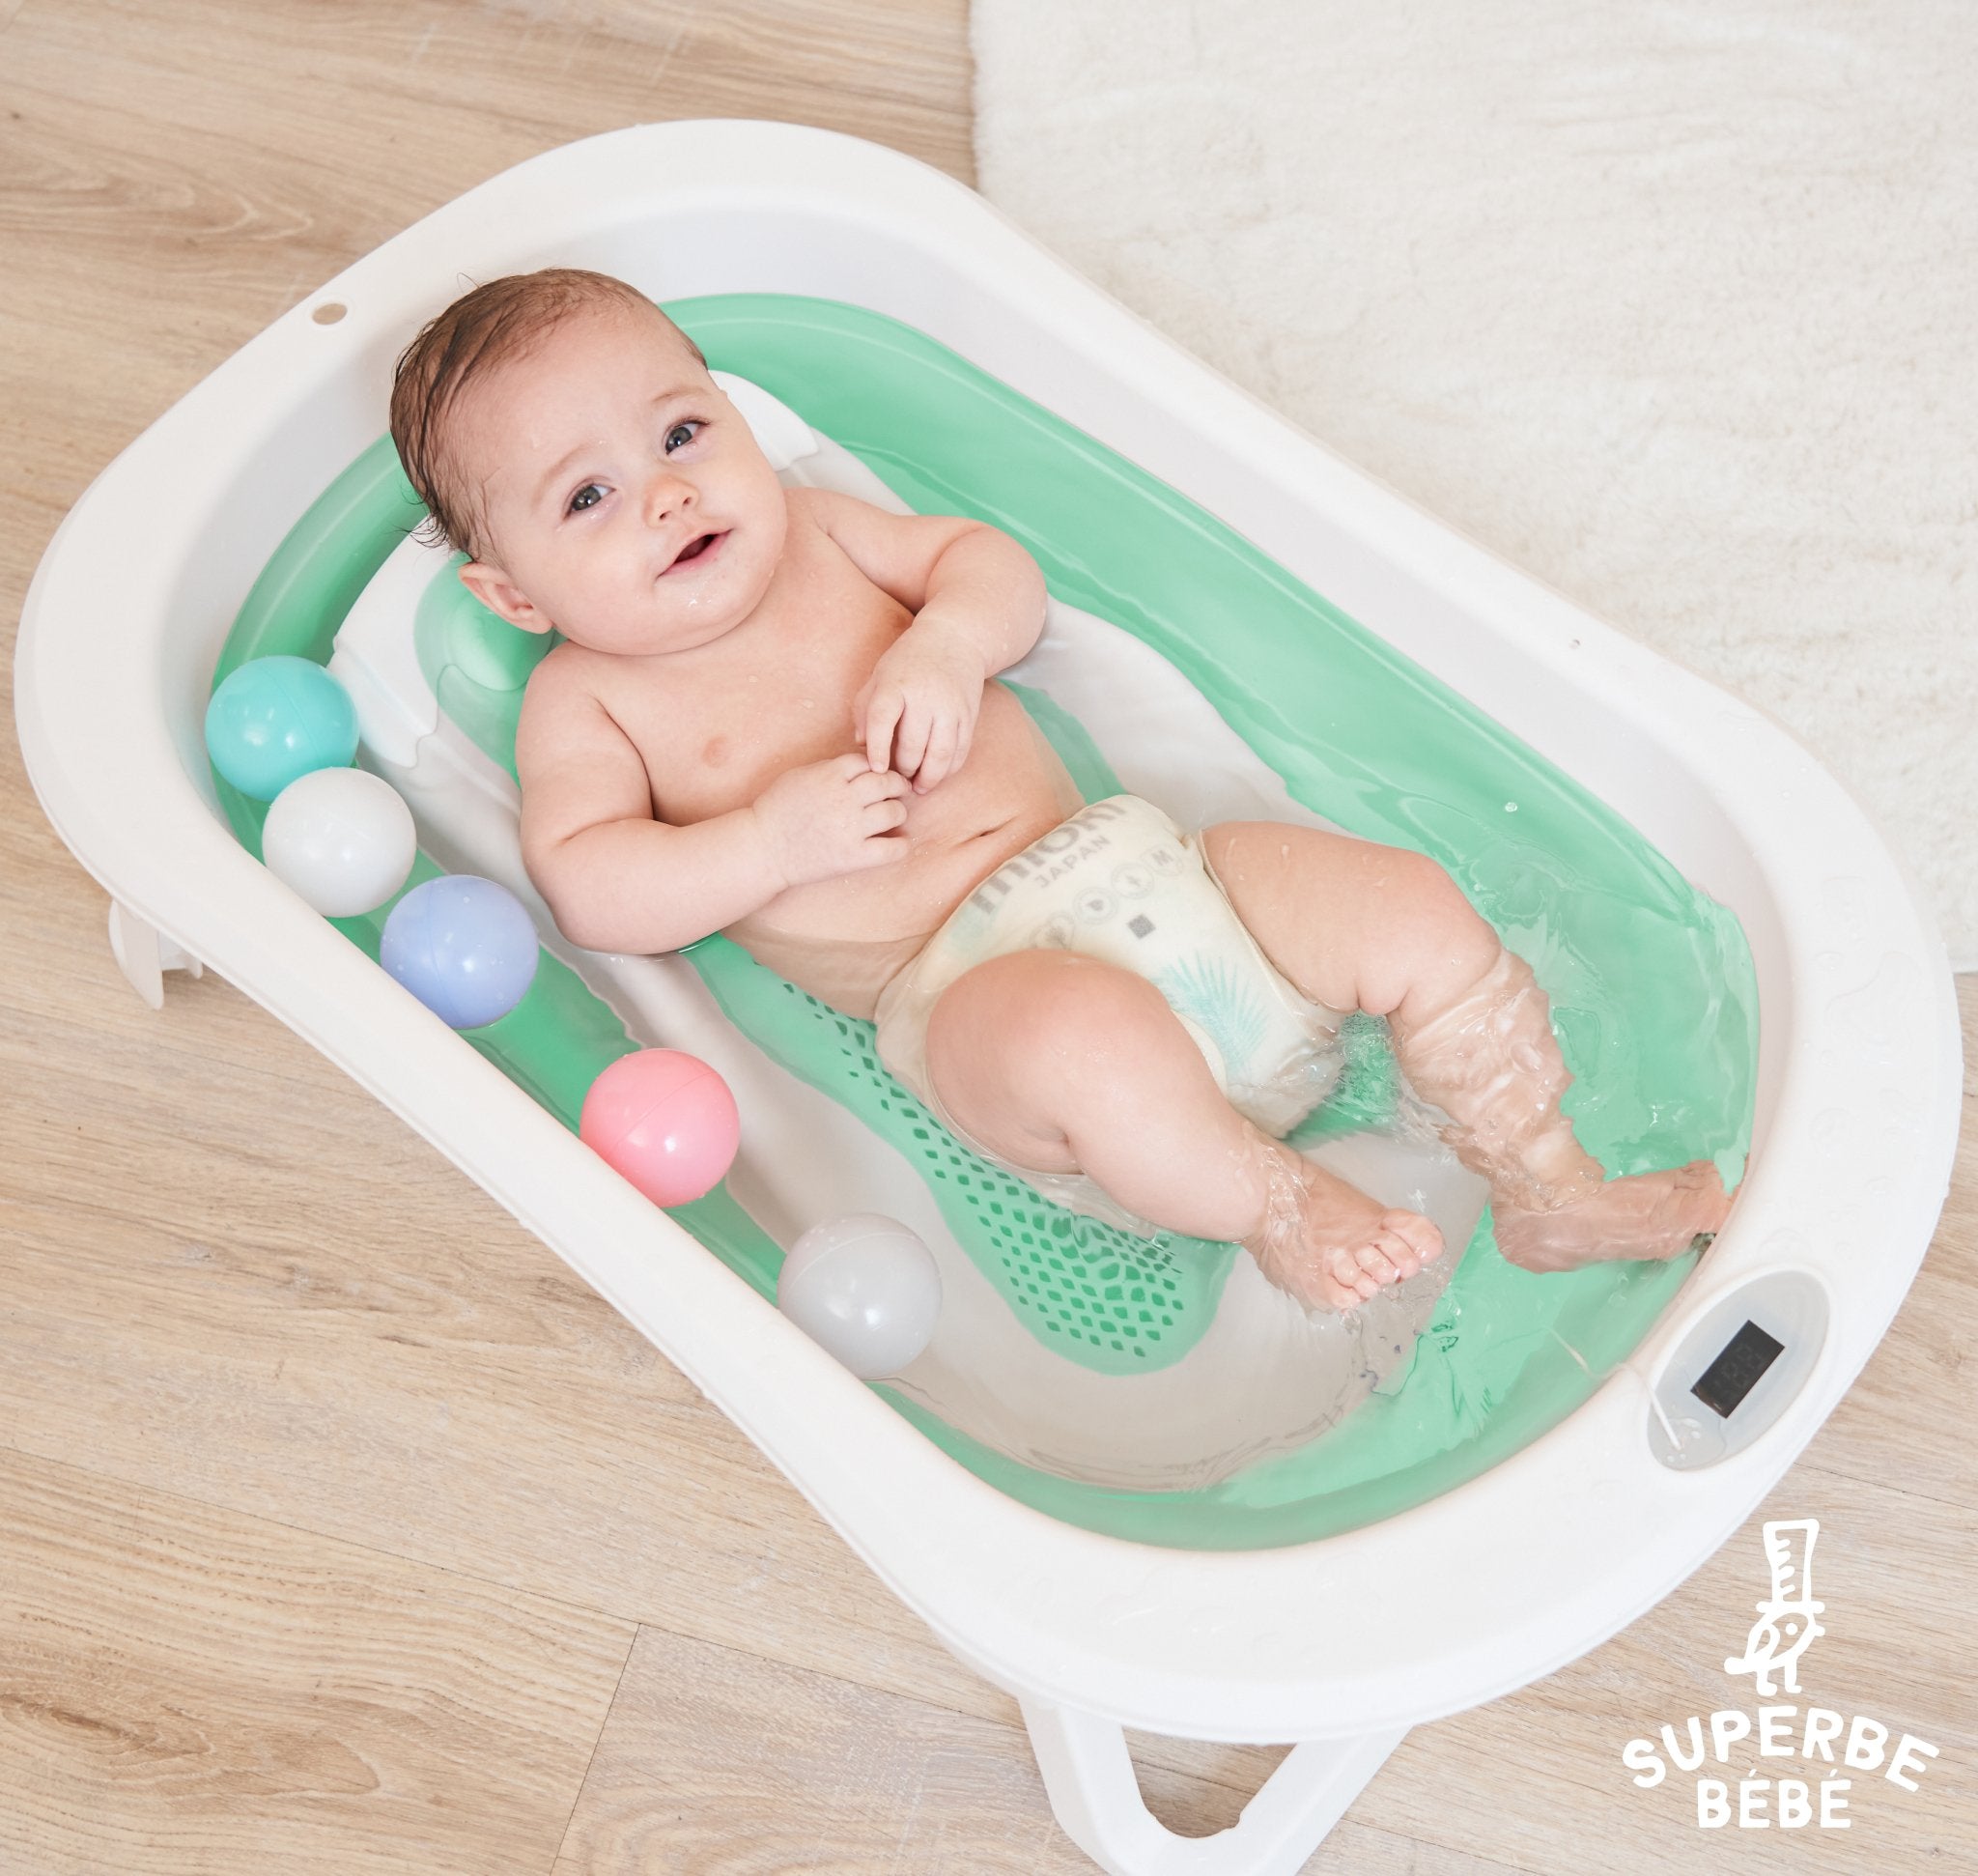 Superb Baby - Foldable baby bath kit with deckchair, thermometer